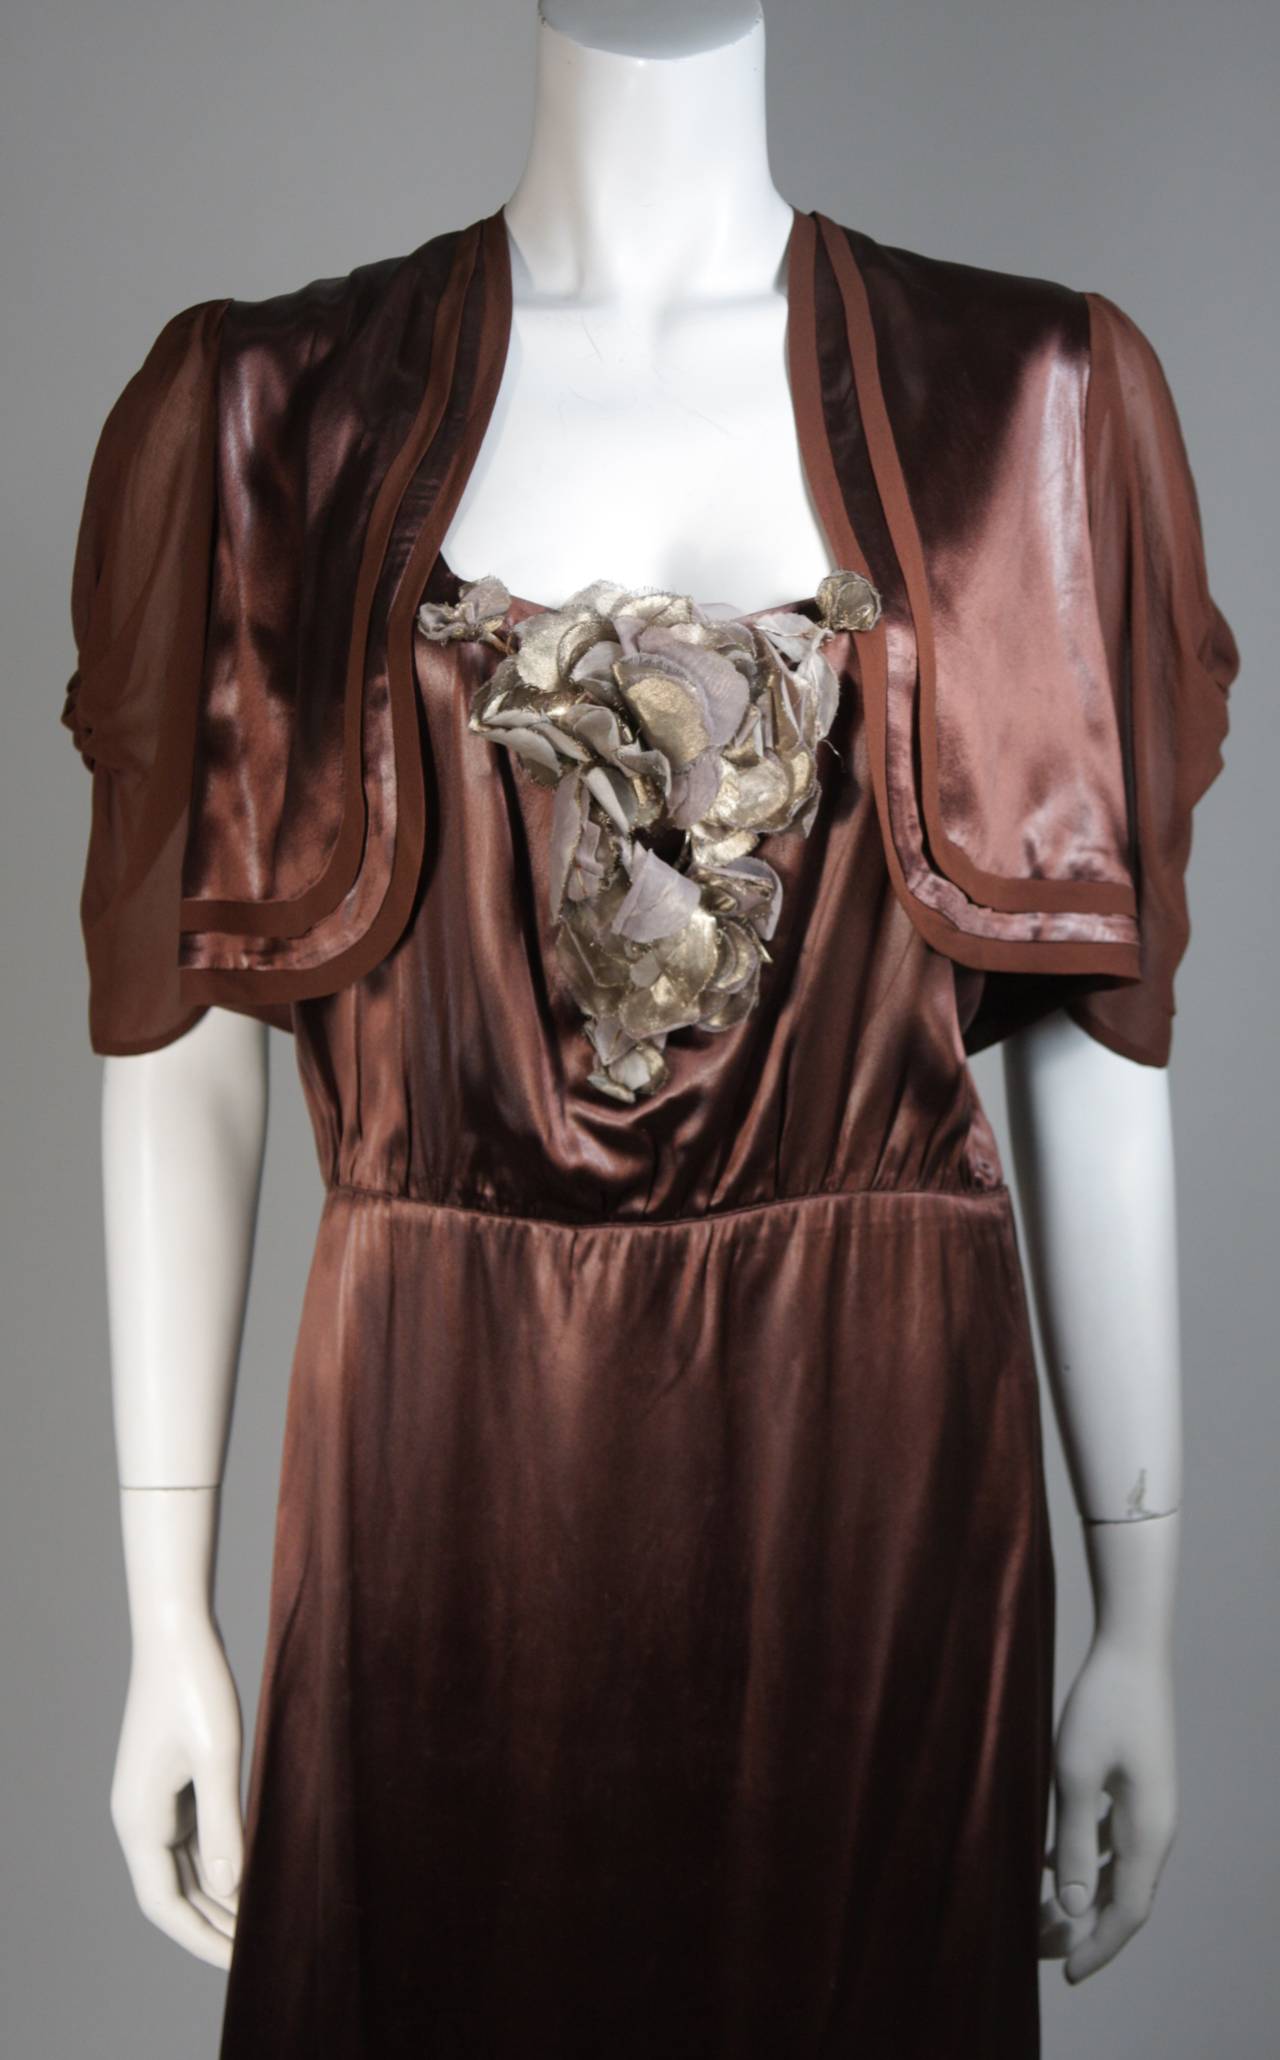 This Madame Eme set is composed of a brown silk and features a floral accent. There are side hook and eye closures on the dress. The bolero has an open style with draped sleeves. In excellent vintage condition.

**Please cross-reference